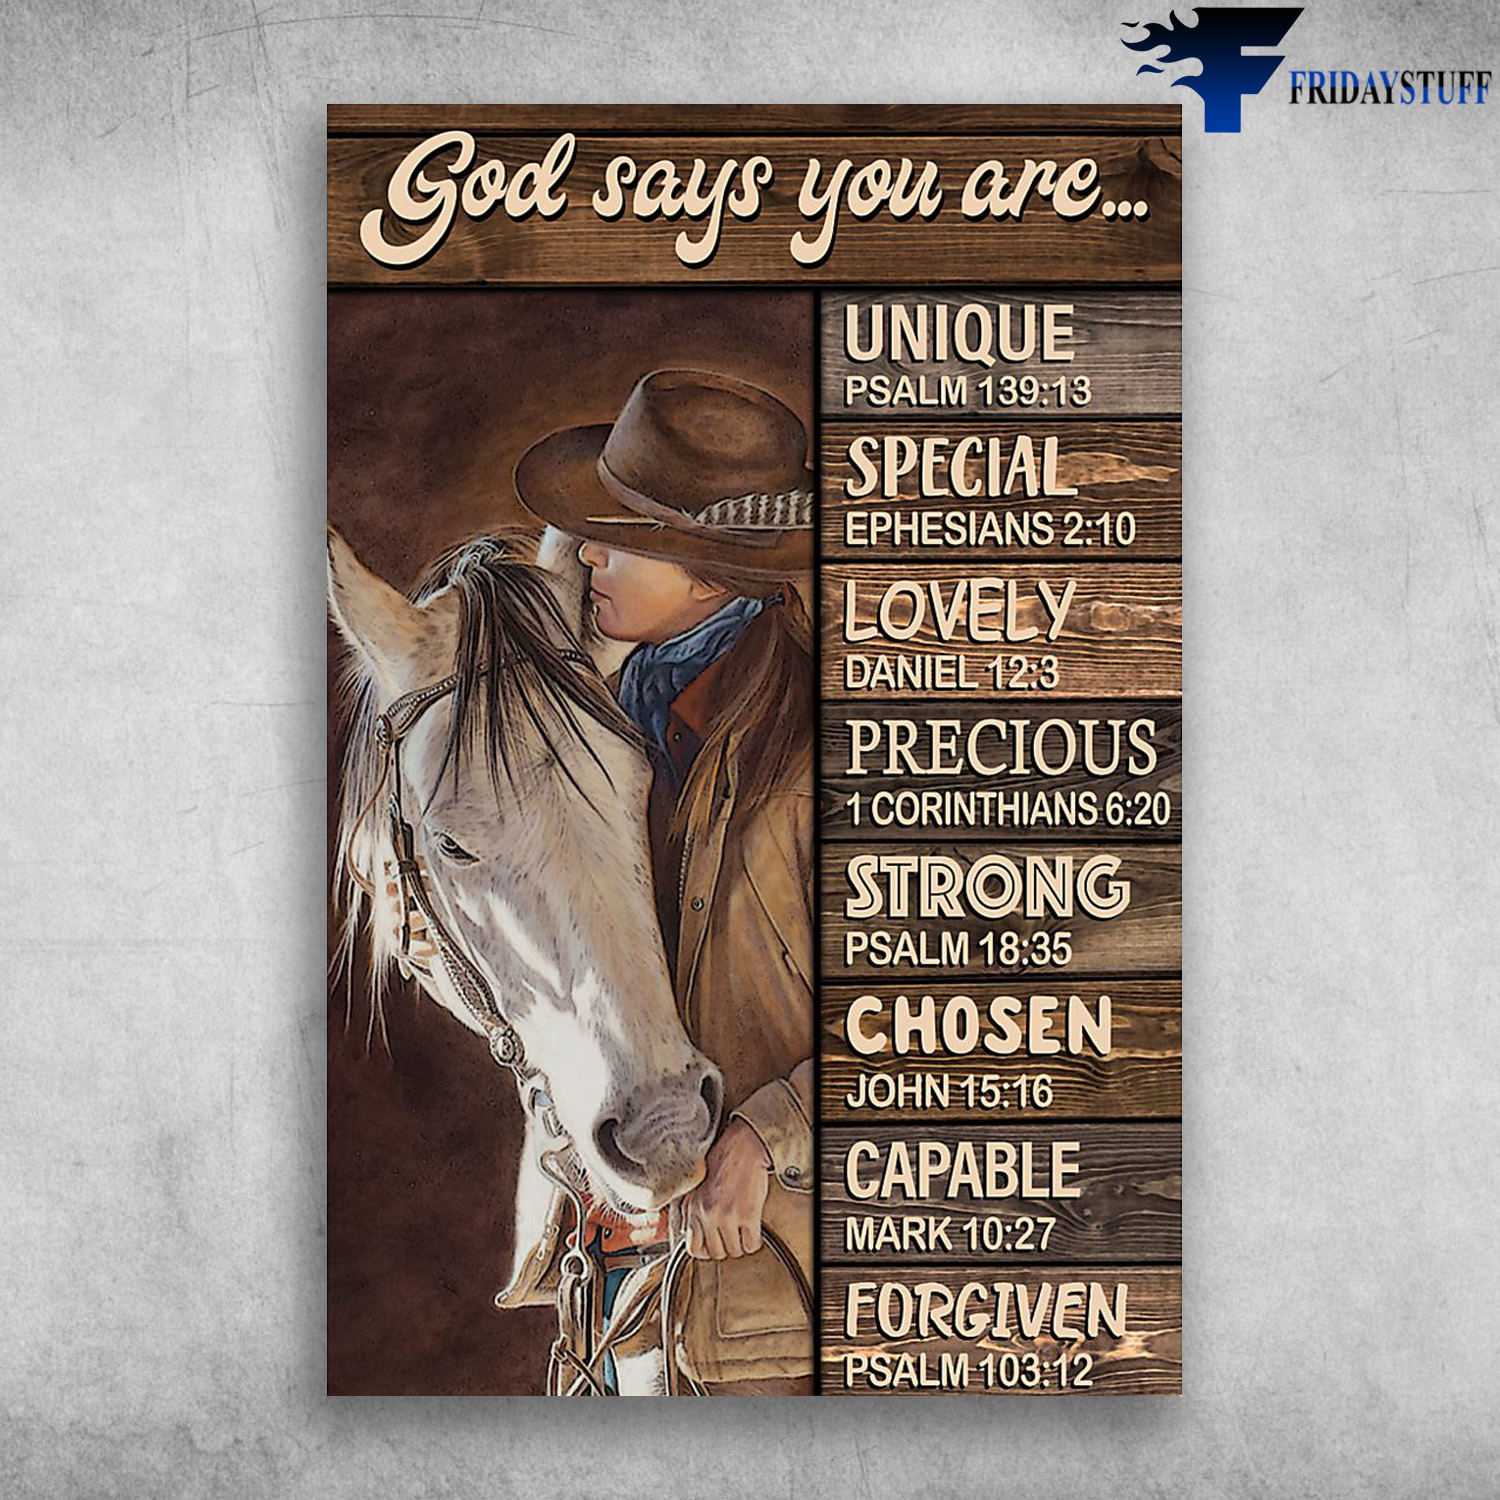 Cowgirl And The Horse - God Say You Are Unique, Special And Lovely, Precious And Strong